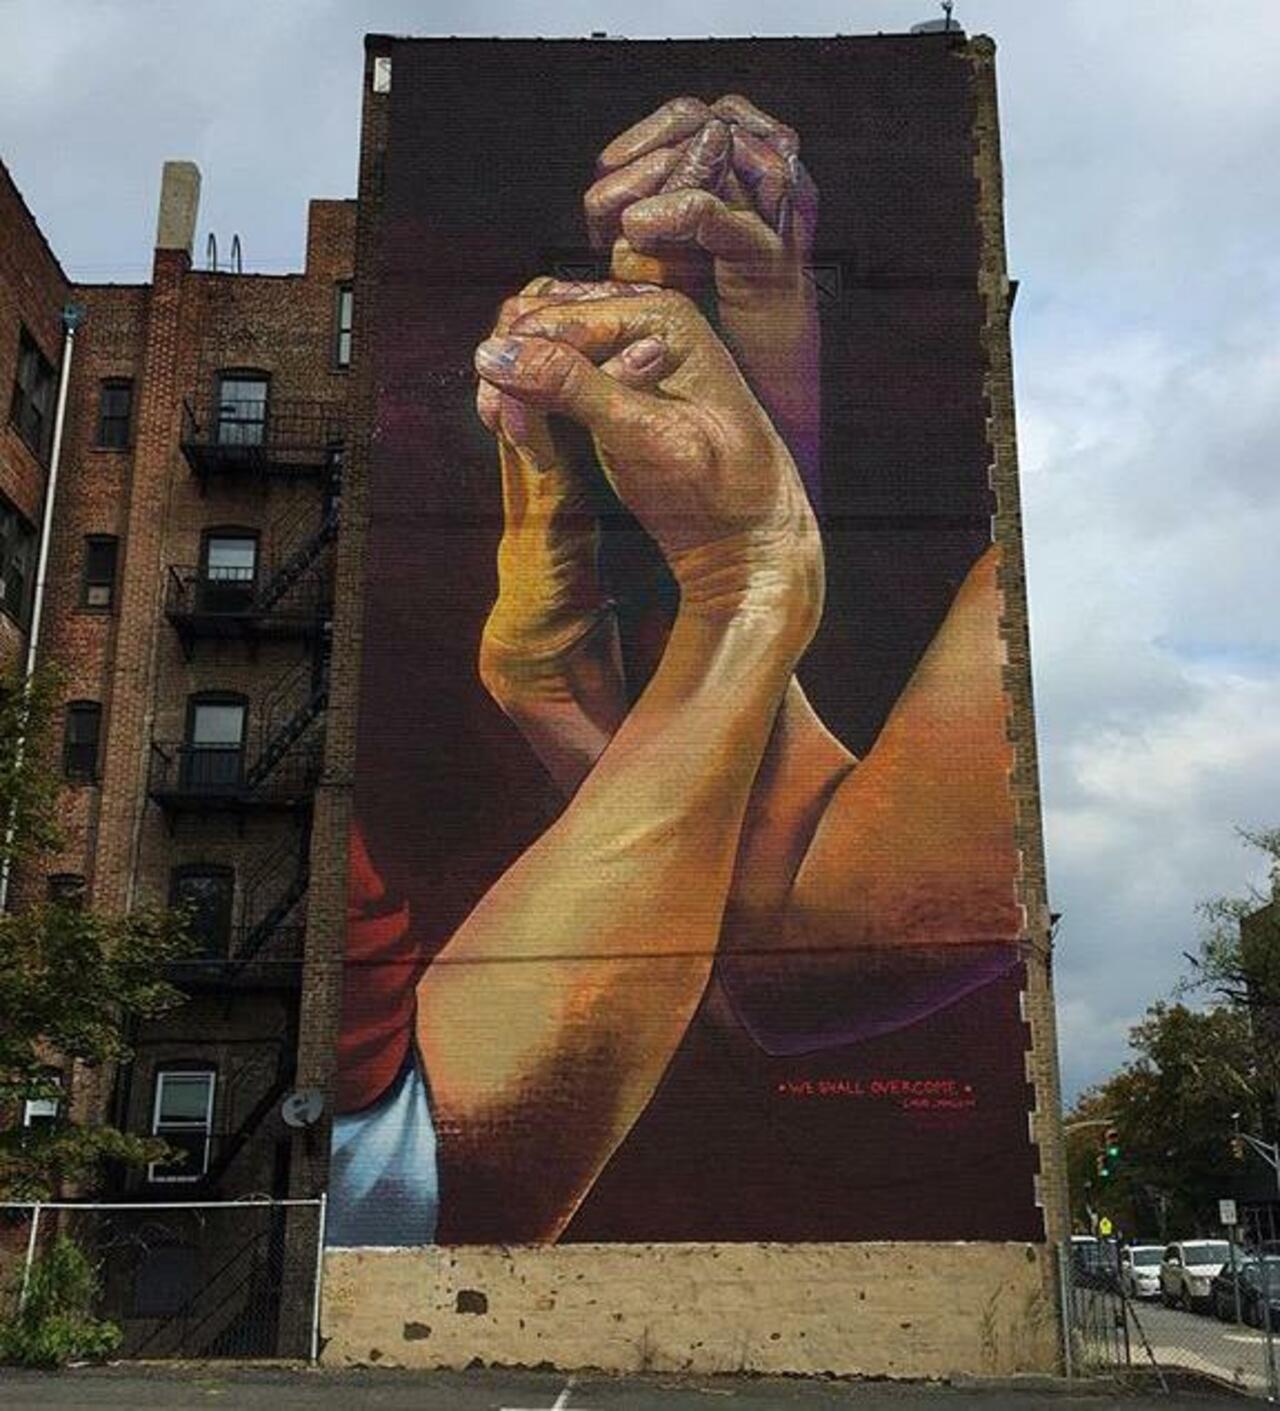 New Street Art by CaseMaclaim in Jersey City for the TheBKcollective 

#art #graffiti #mural #streetart http://t.co/d87P8TiWwp